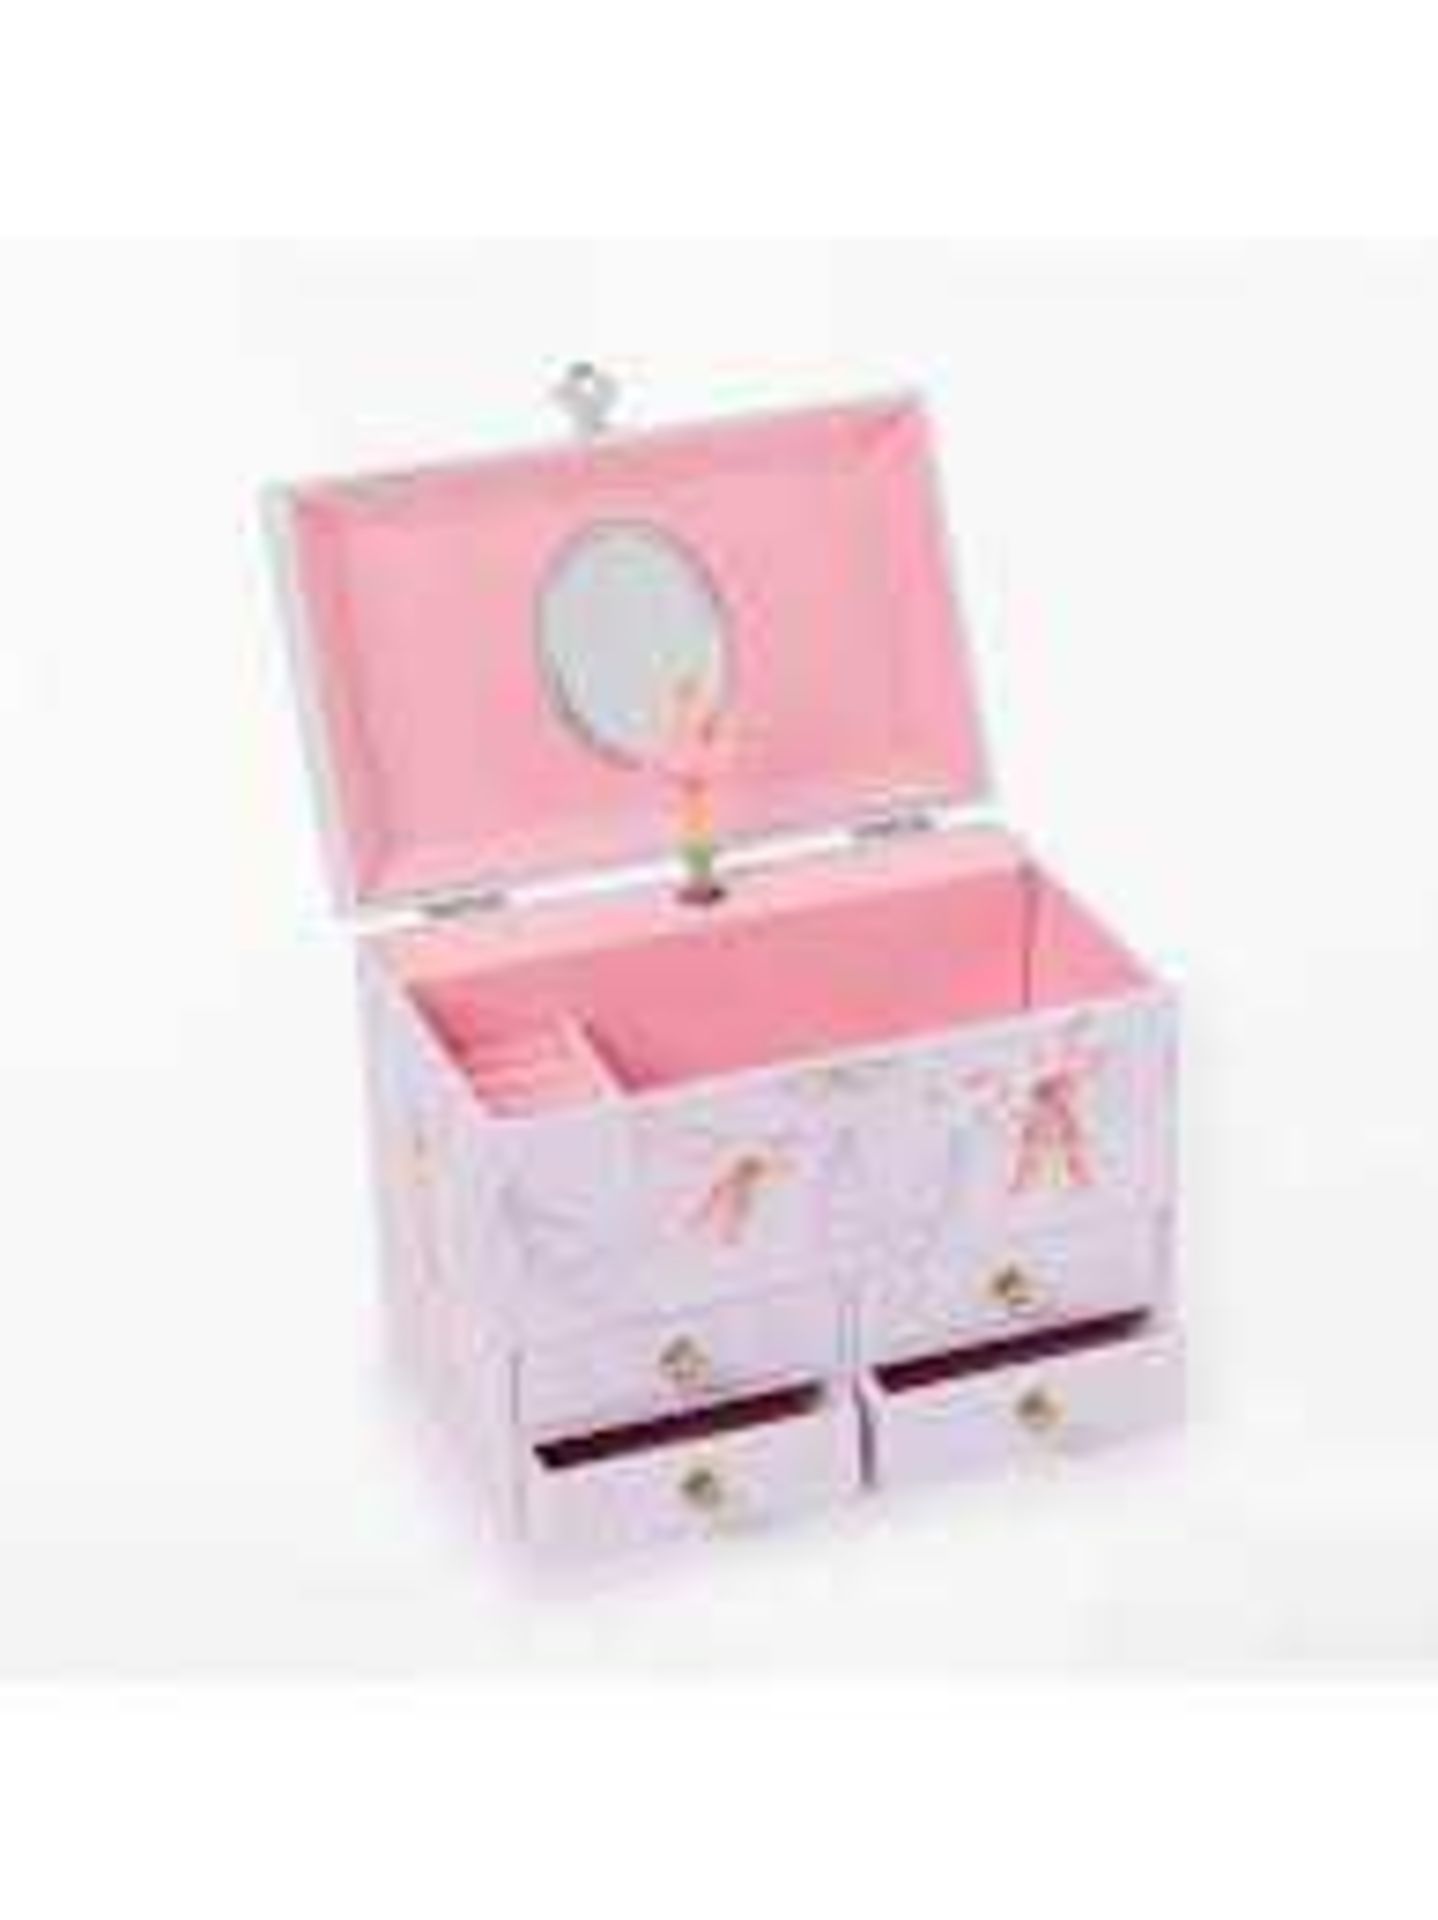 RRP £10 - £15 Each Boxed John Lewis Children's Toys To Include Jewellery Boxes & My First Doll